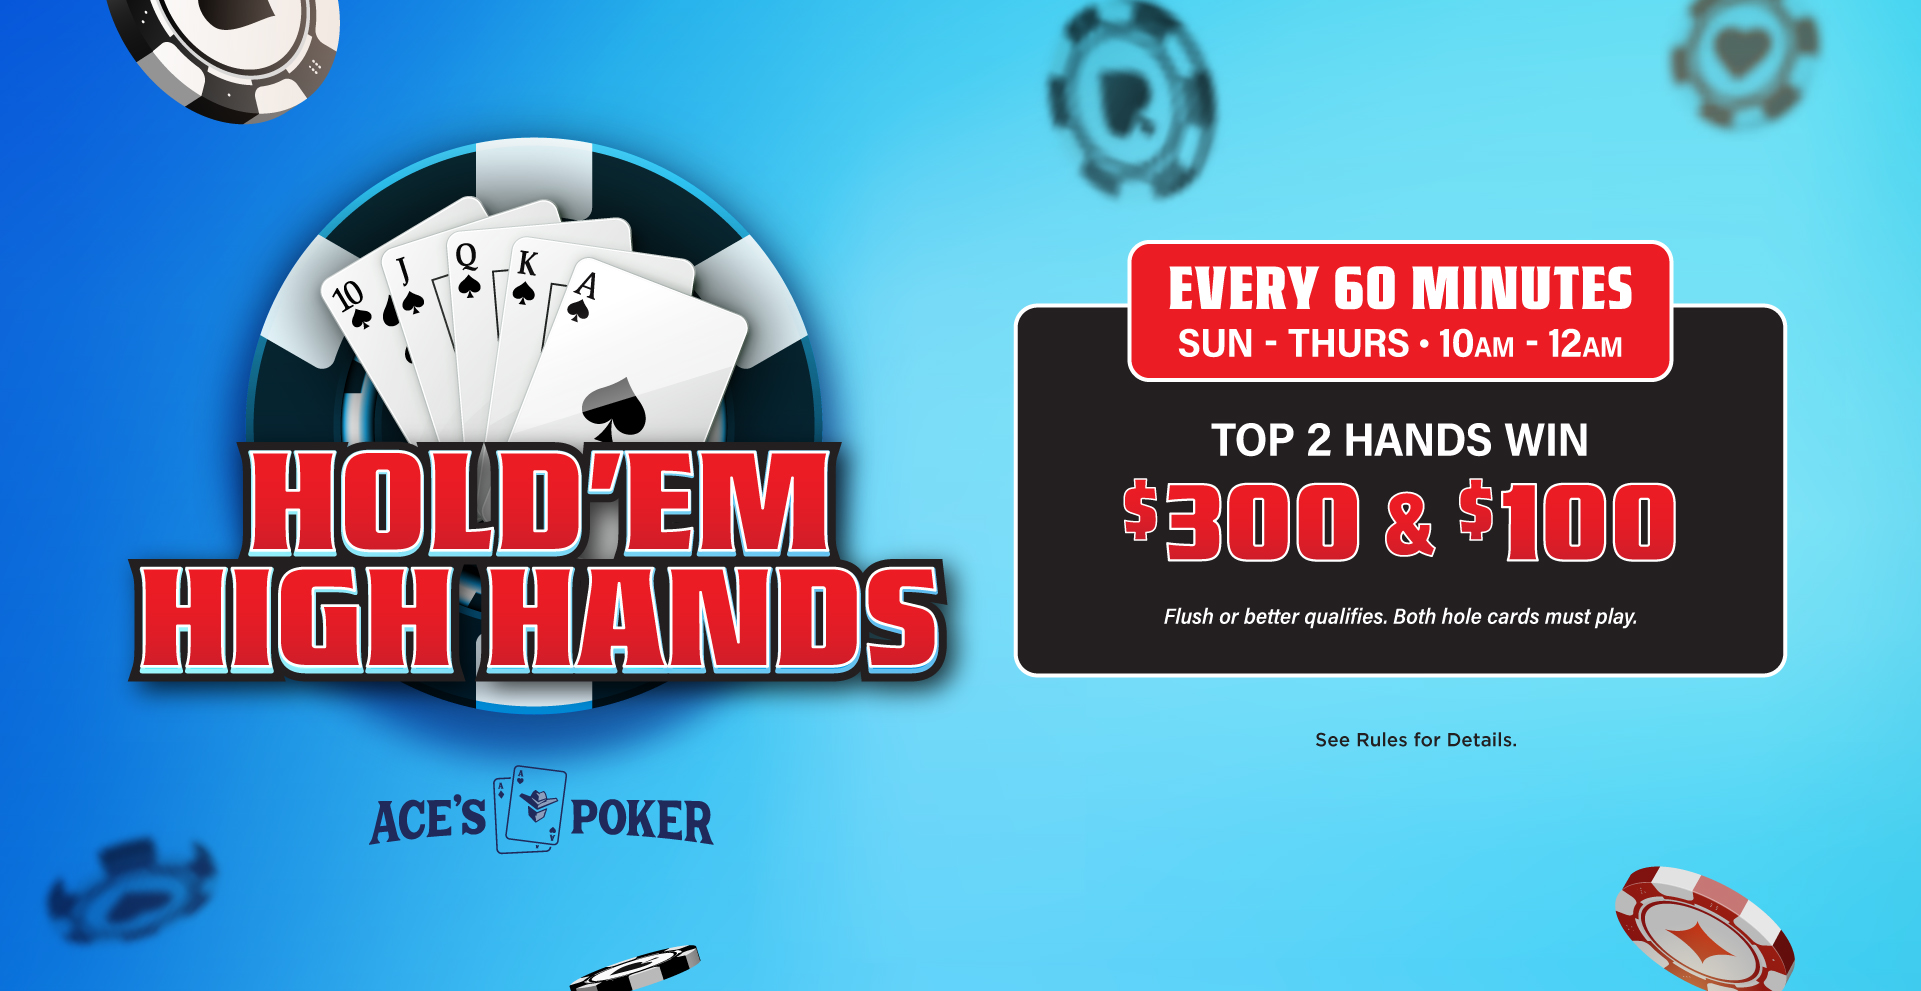 Ace's Poker | Weekday High Hands